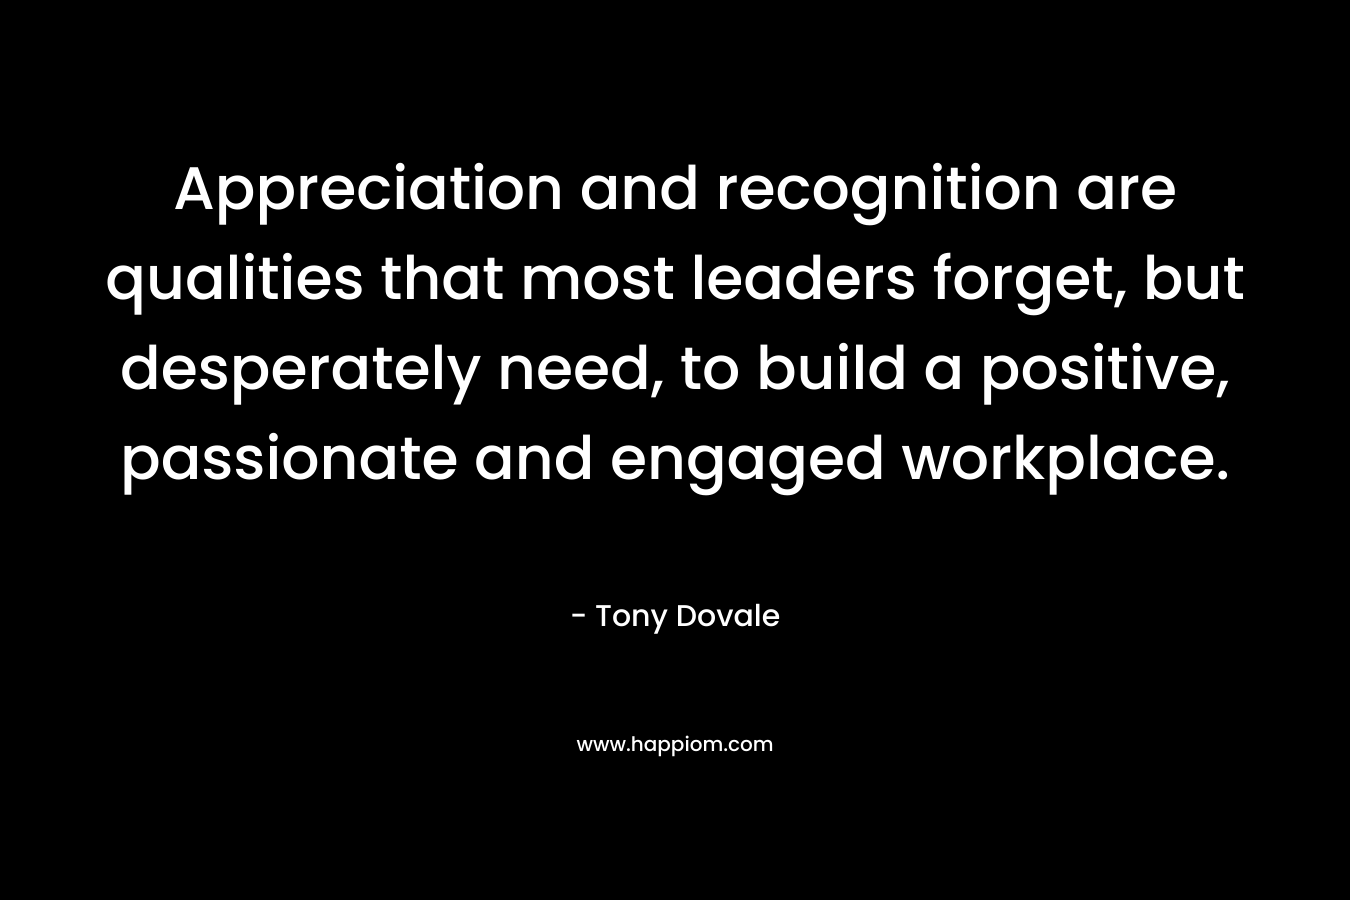 Appreciation and recognition are qualities that most leaders forget, but desperately need, to build a positive, passionate and engaged workplace. – Tony Dovale